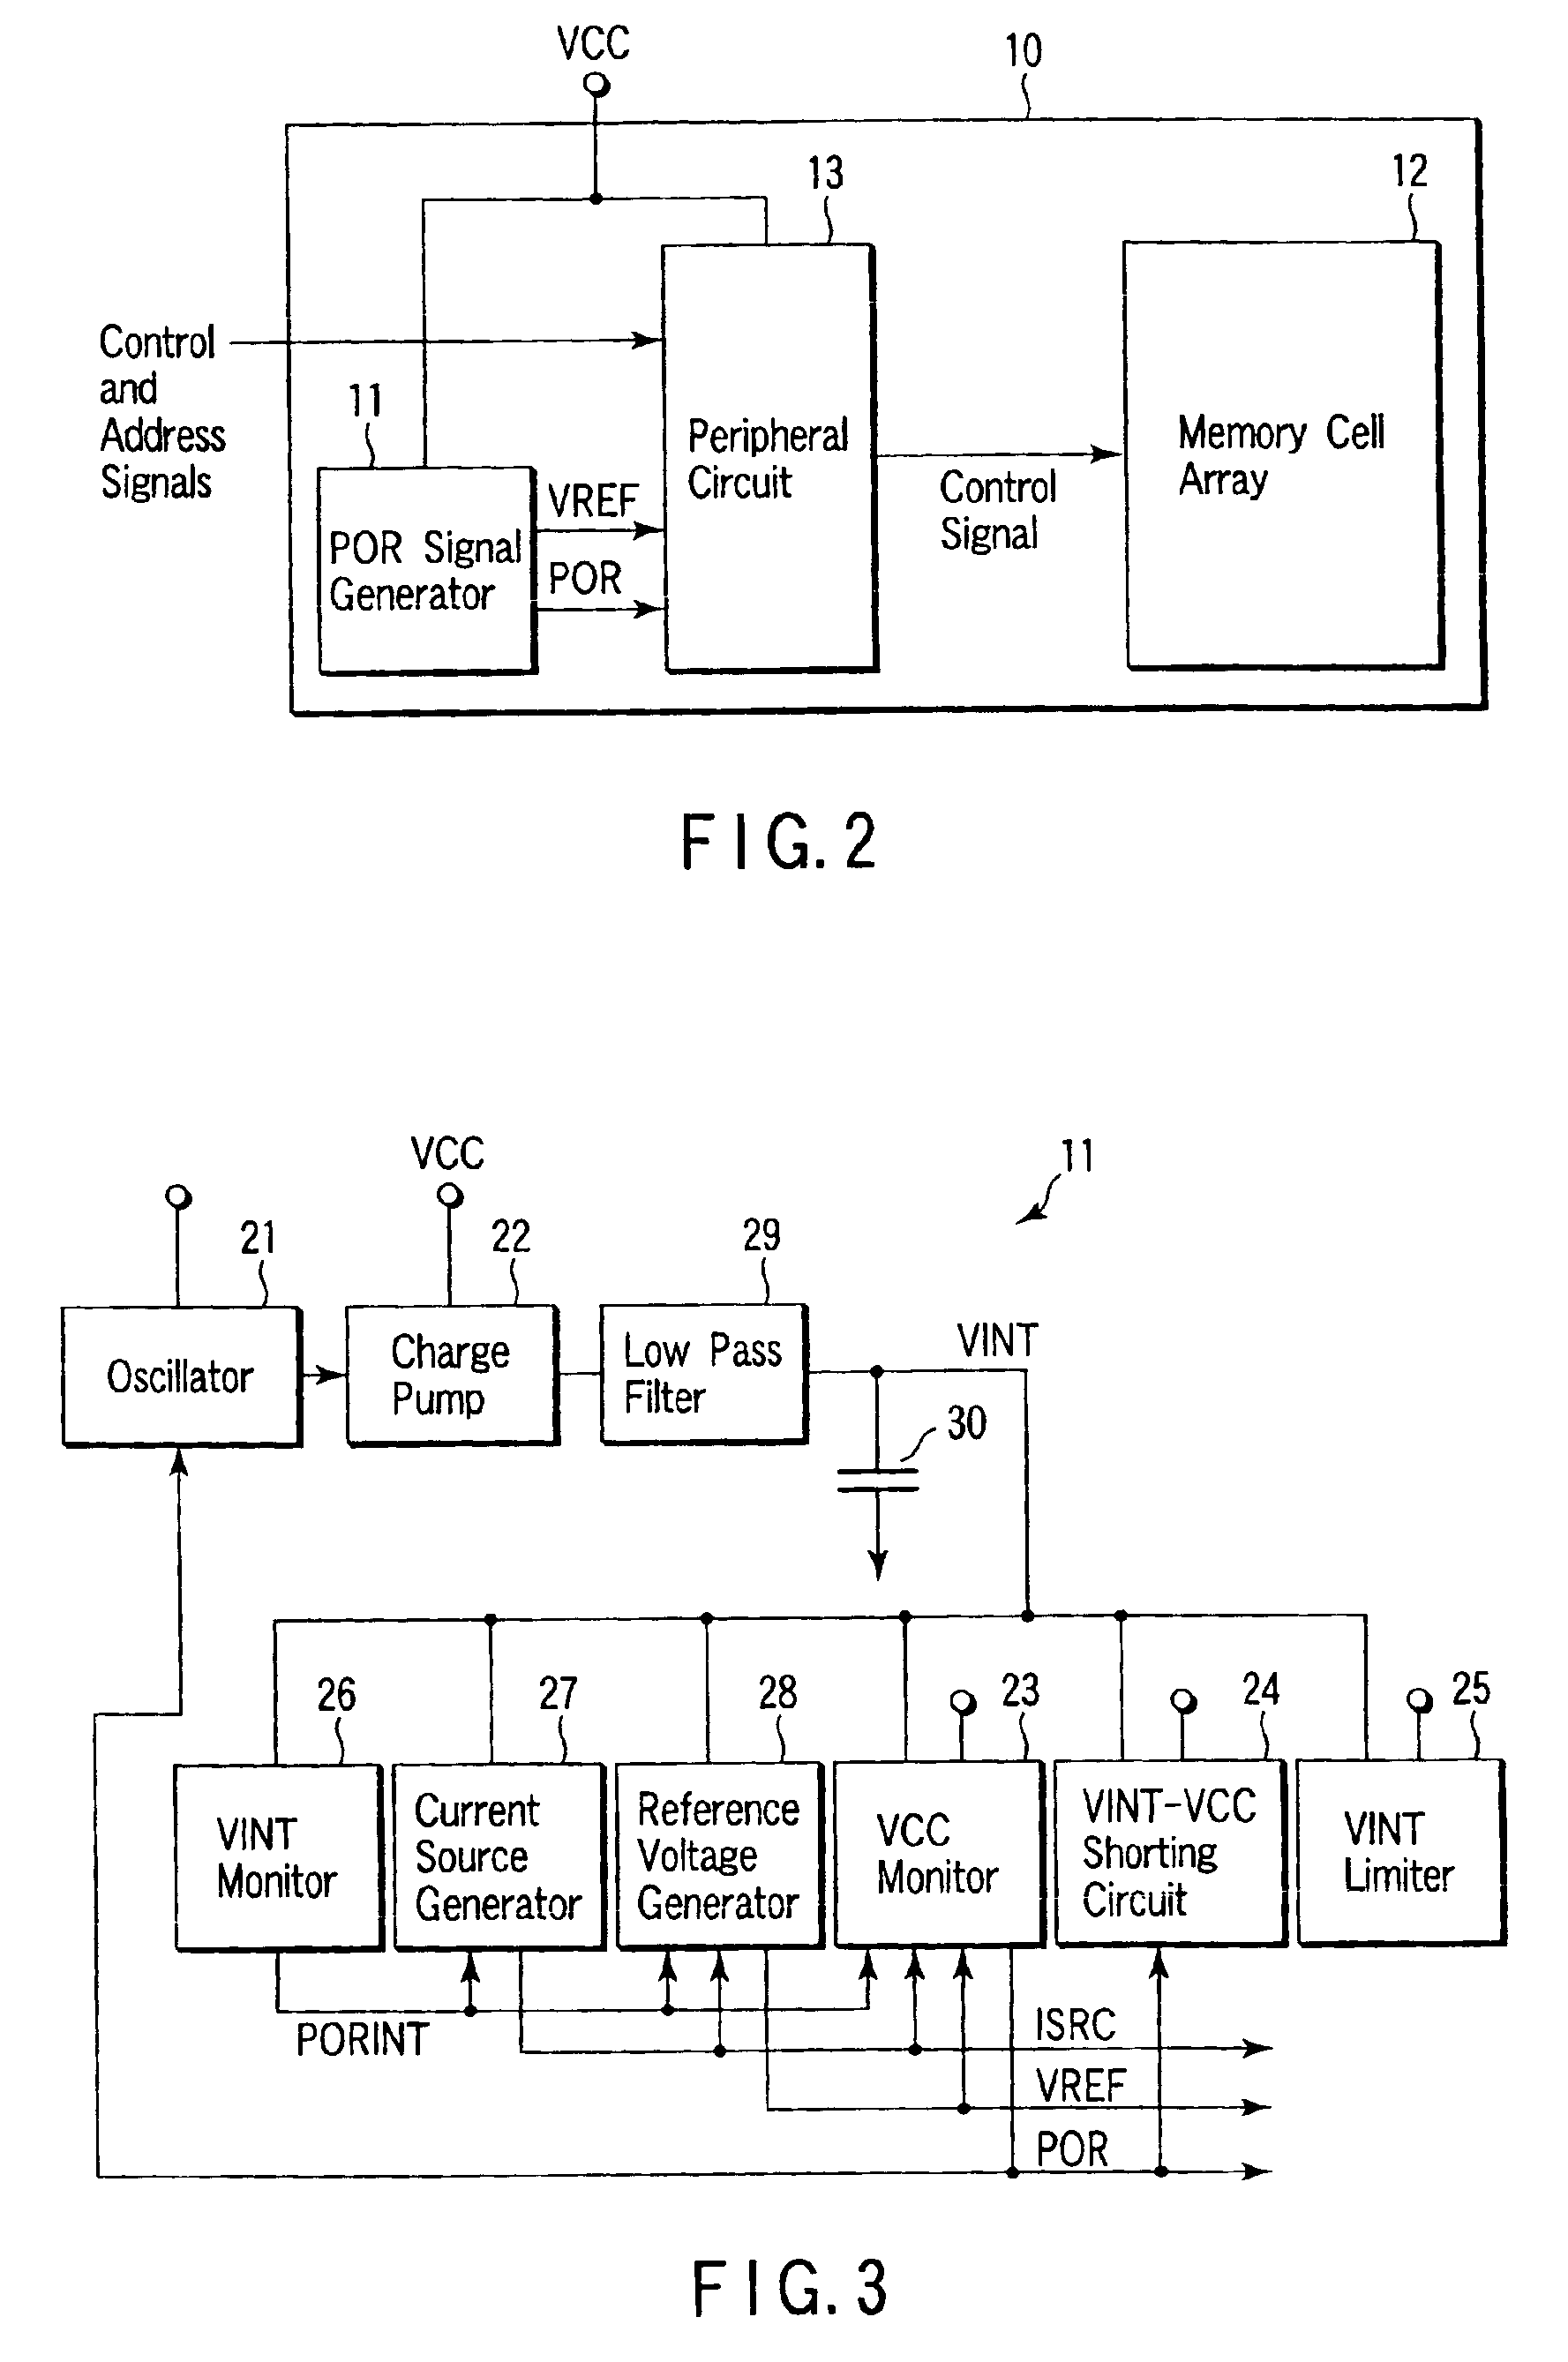 Semiconductor memory device having a power-on reset circuit